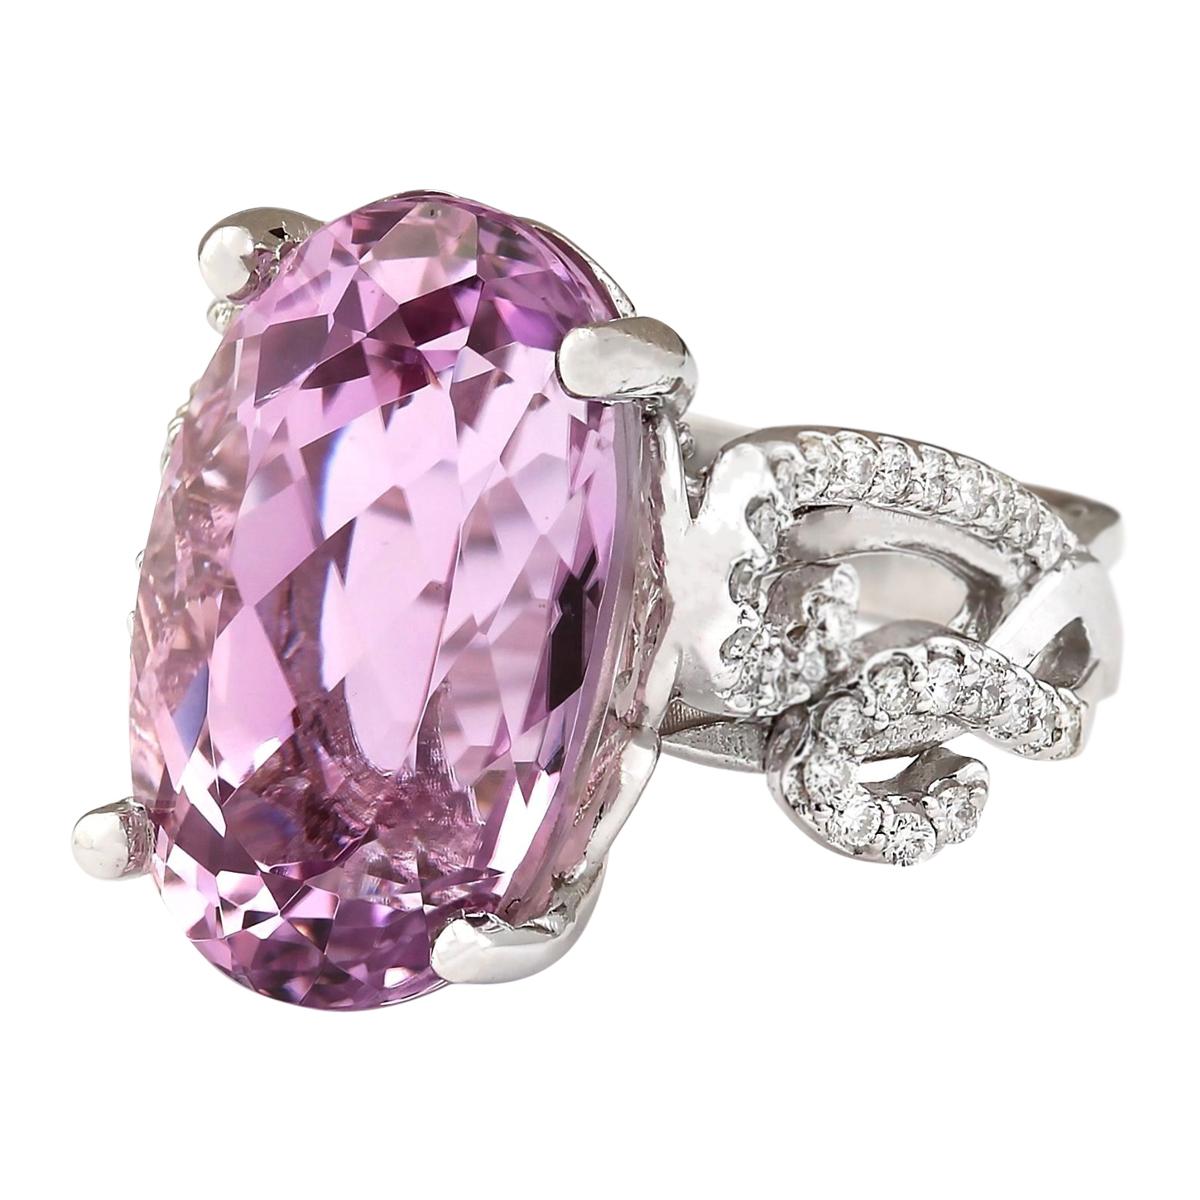 Stamped: 14K White Gold
Total Ring Weight: 10.0 Grams
Total Natural Kunzite Weight is 13.36 Carat (Measures: 16.00x12.00 mm)
Color: Pink
Total Natural Diamond Weight is 0.50 Carat
Color: F-G, Clarity: VS2-SI1
Face Measures: 17.65x10.90 mm
Sku: